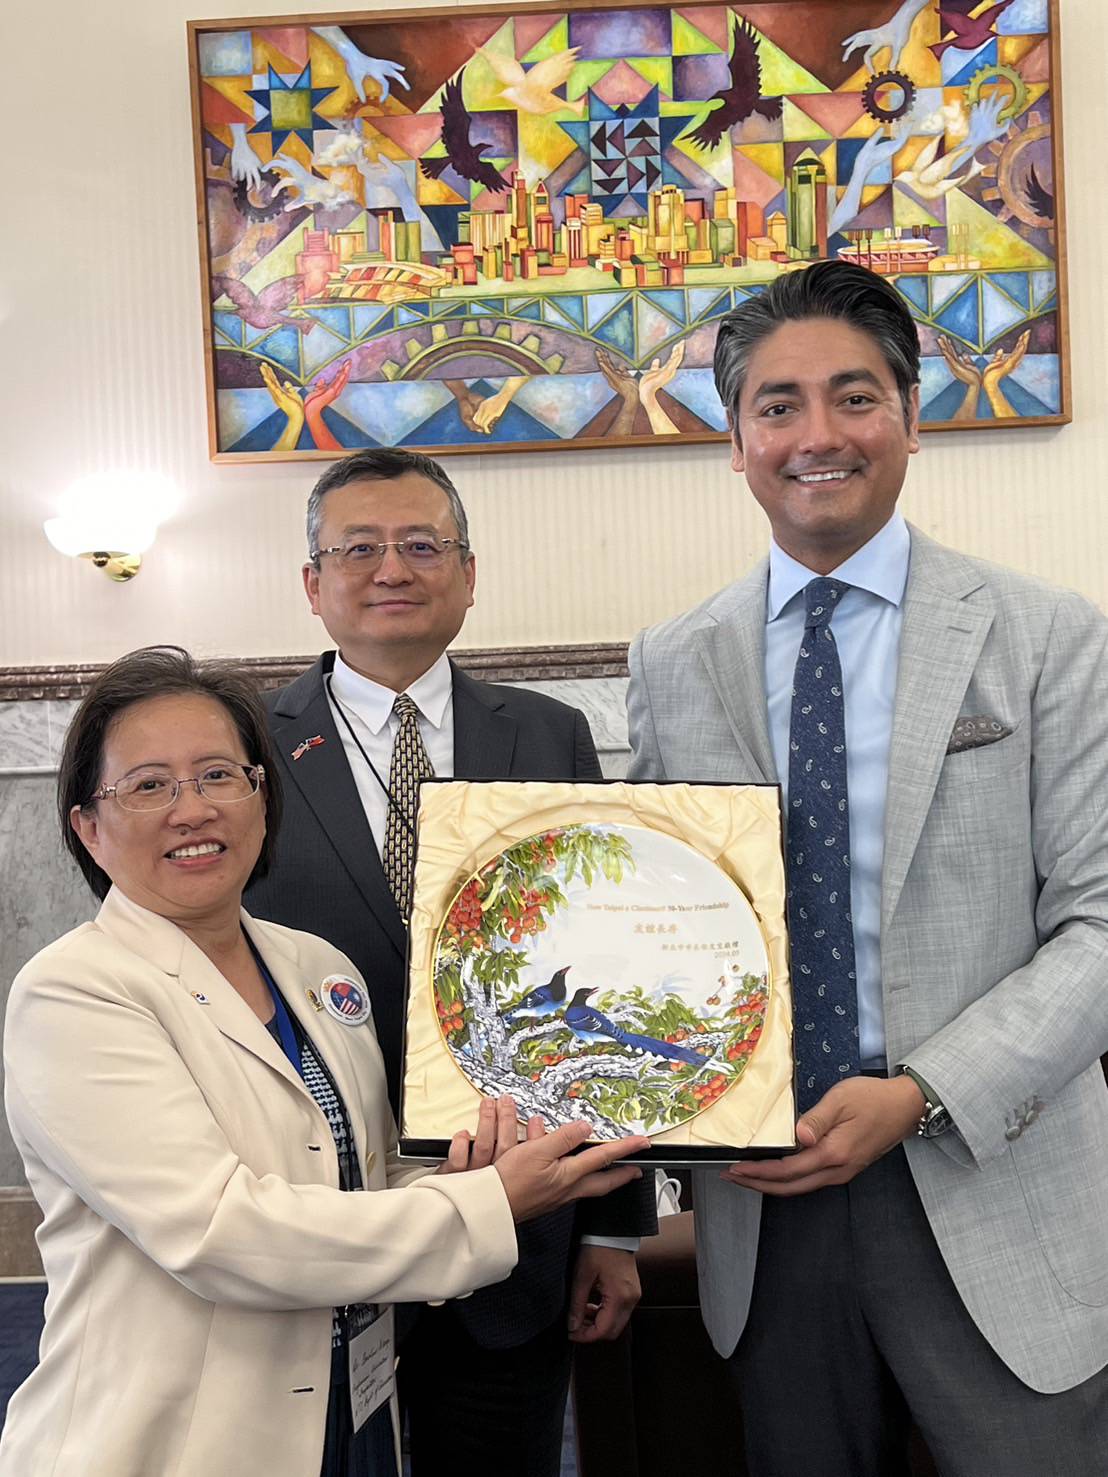  Dr. Wang Lu-lin (left), representing Mayor Hou, presents the 30th-anniversary commemorative porcelain plate to Mayor Aftab Pureval (right). In the center is Director General Yen-Feng Lei of the Taipei Economic and Cultural Office in Chicago.